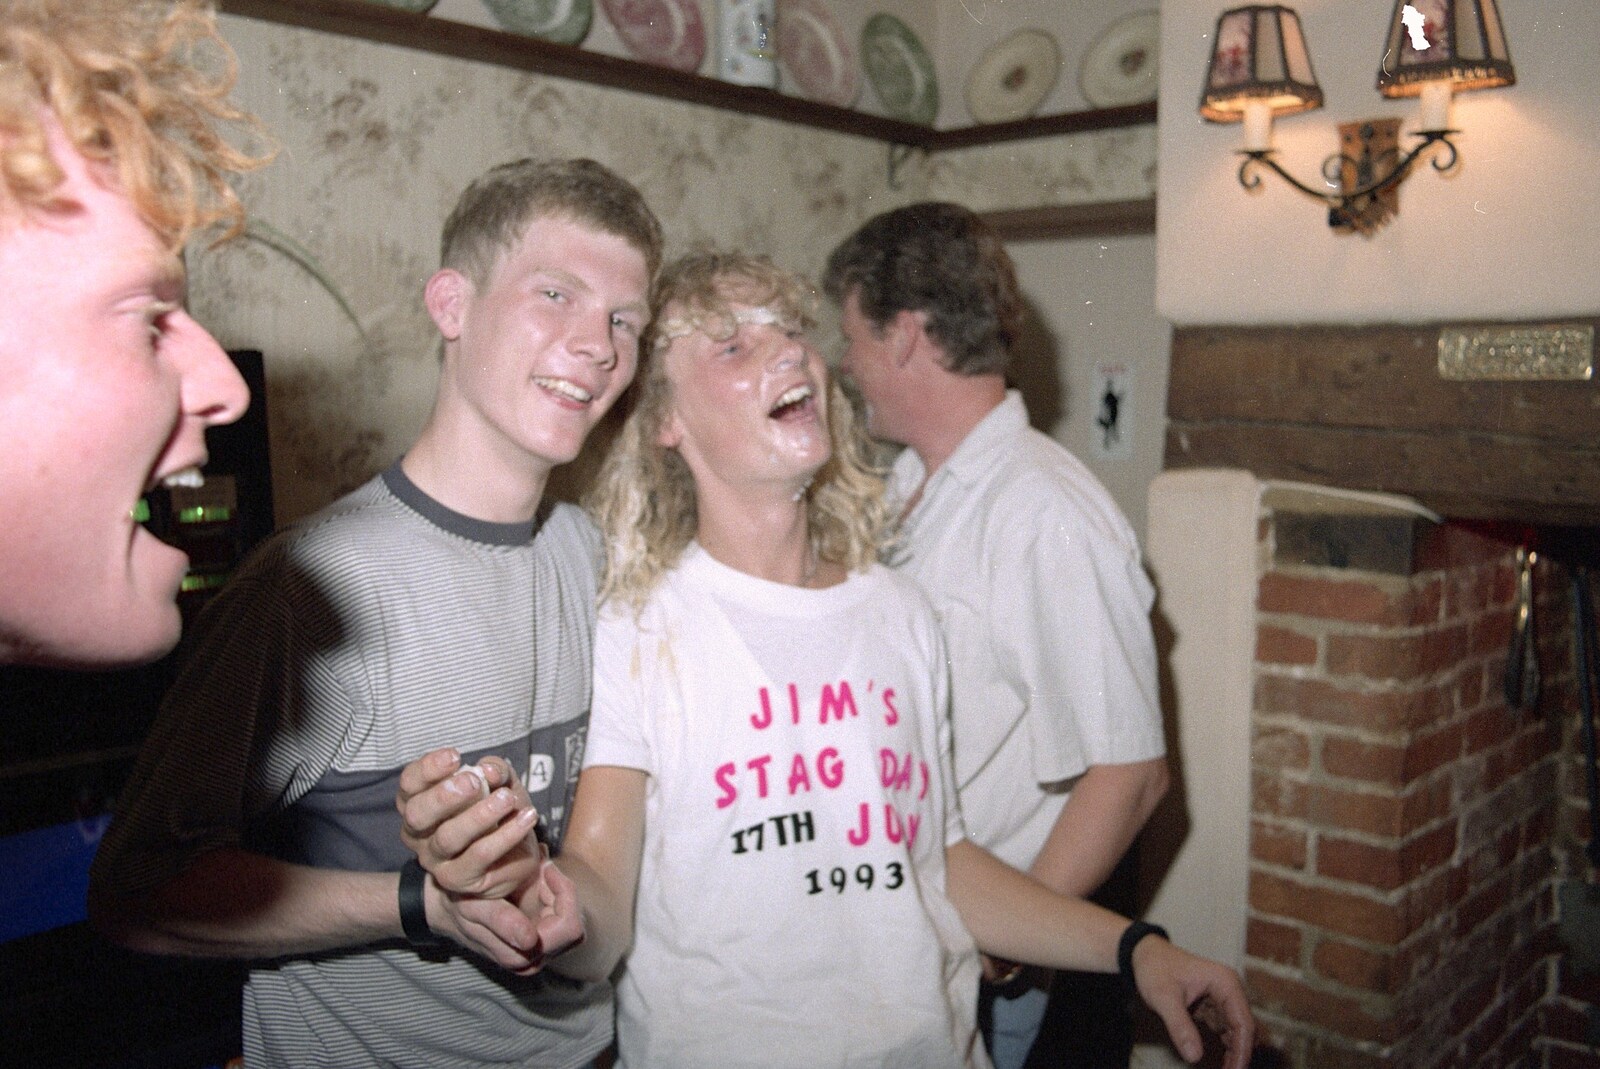 Jim's head is all larded up from Jim's Stag Day and a Stripper, Brome Swan, Suffolk - 17th July 1993